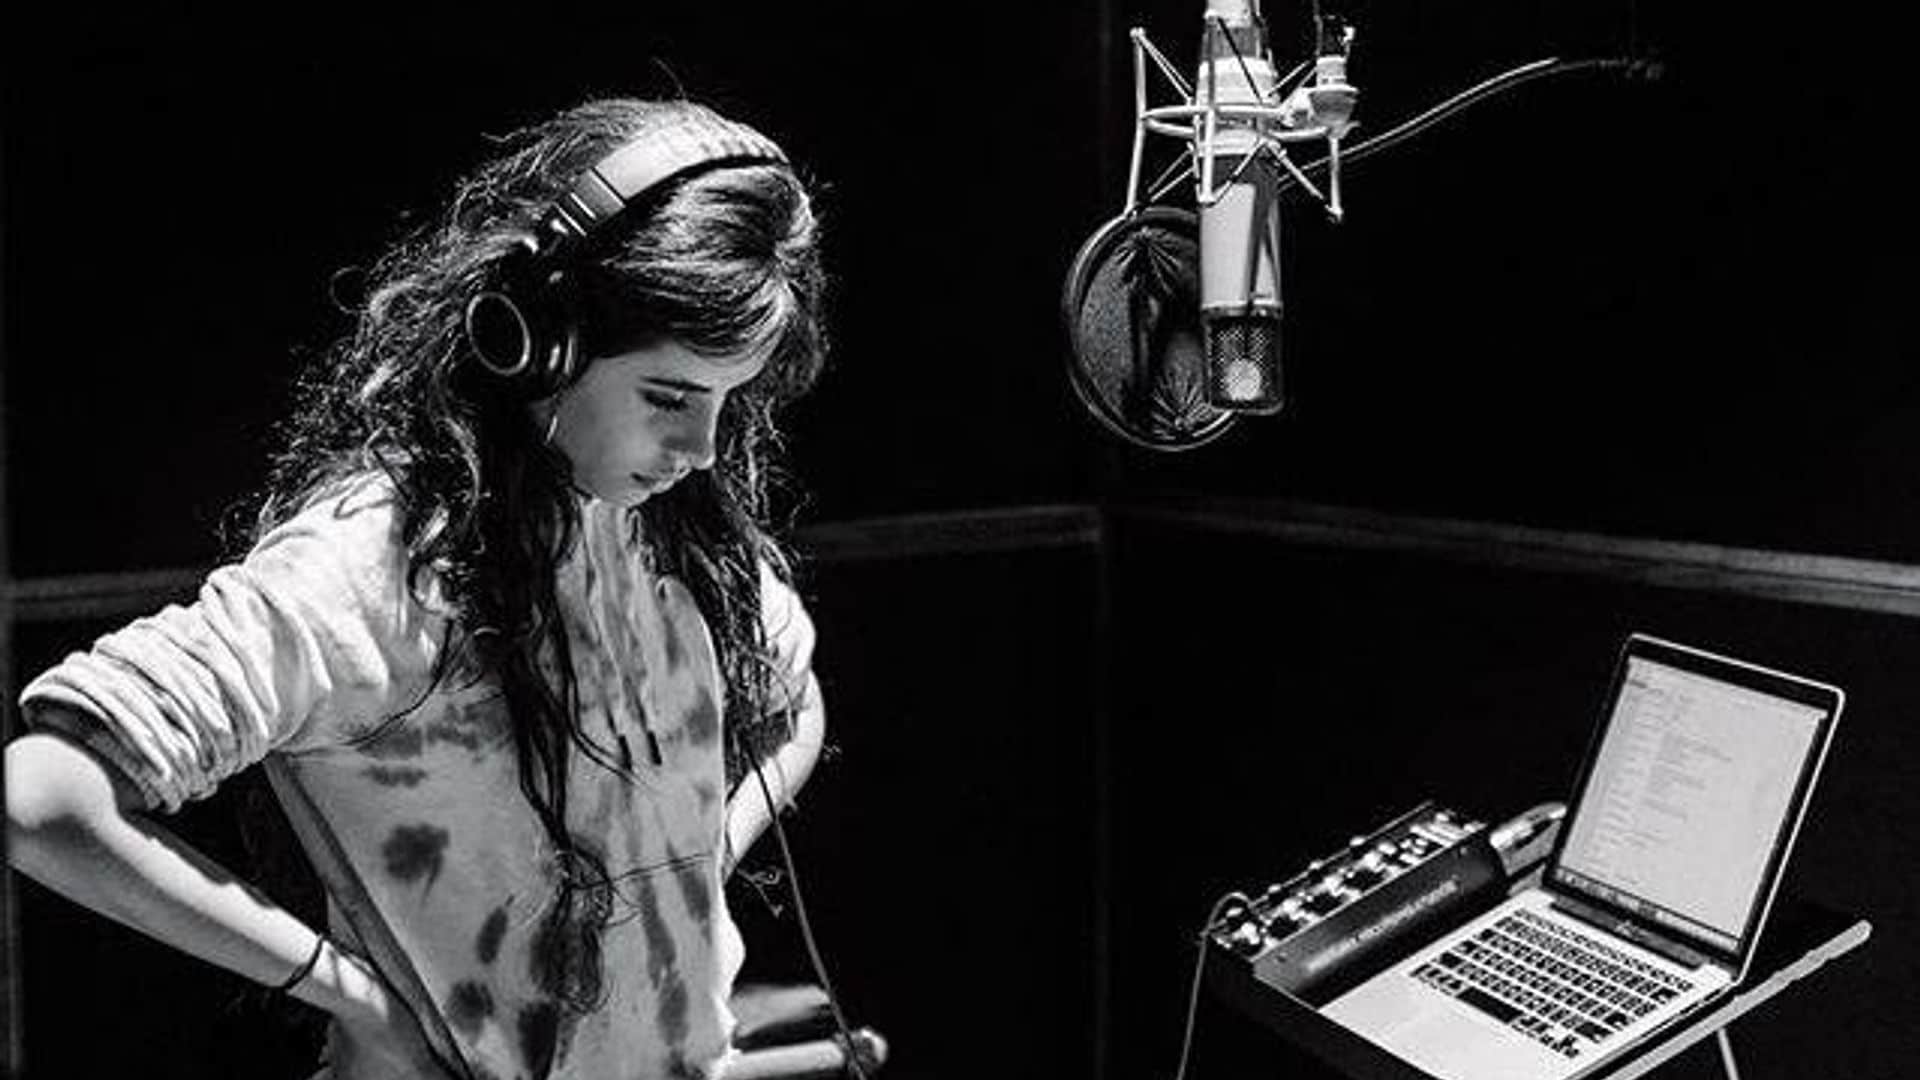 Camila Cabello releases new single ‘Living Proof’ and Shawn Mendes reacts